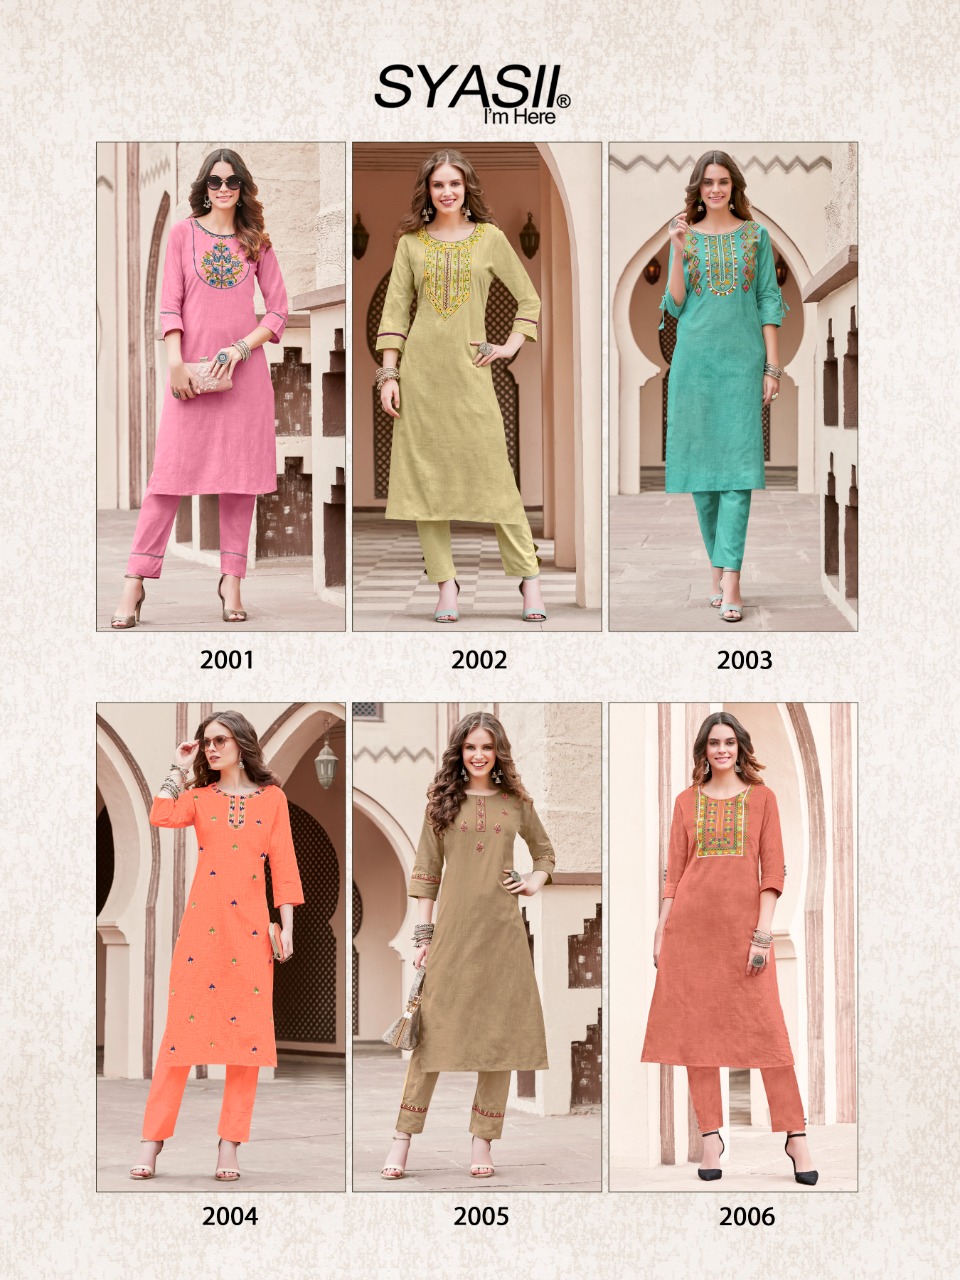 syasii pure vol 2 cotton graceful look kurti with Bottom catalog OLD